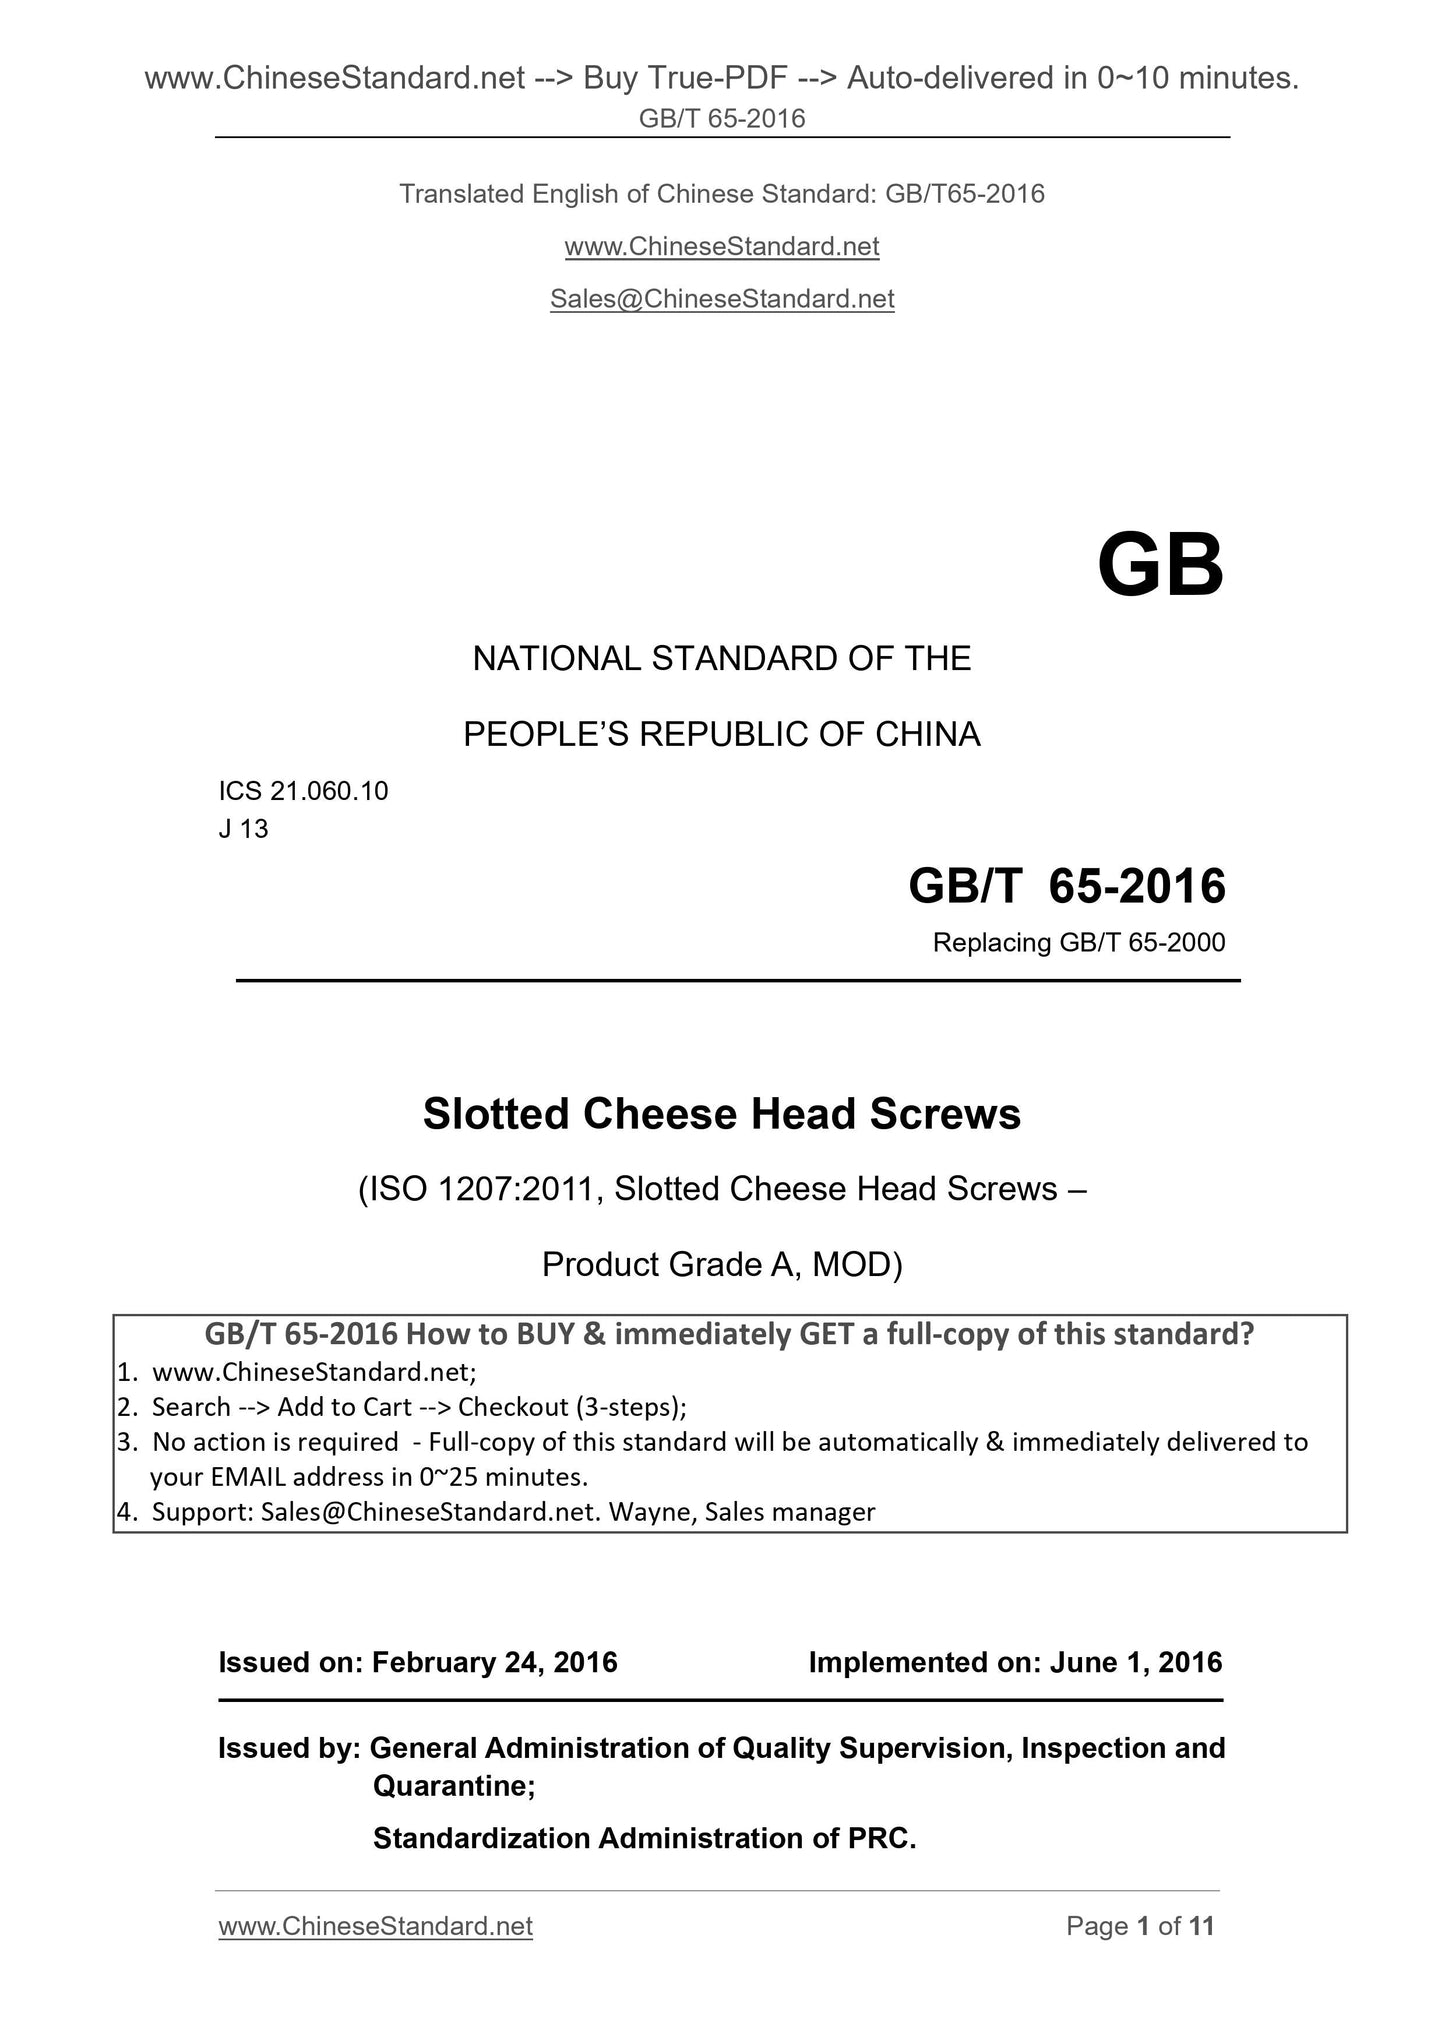 GB/T 65-2016 Page 1